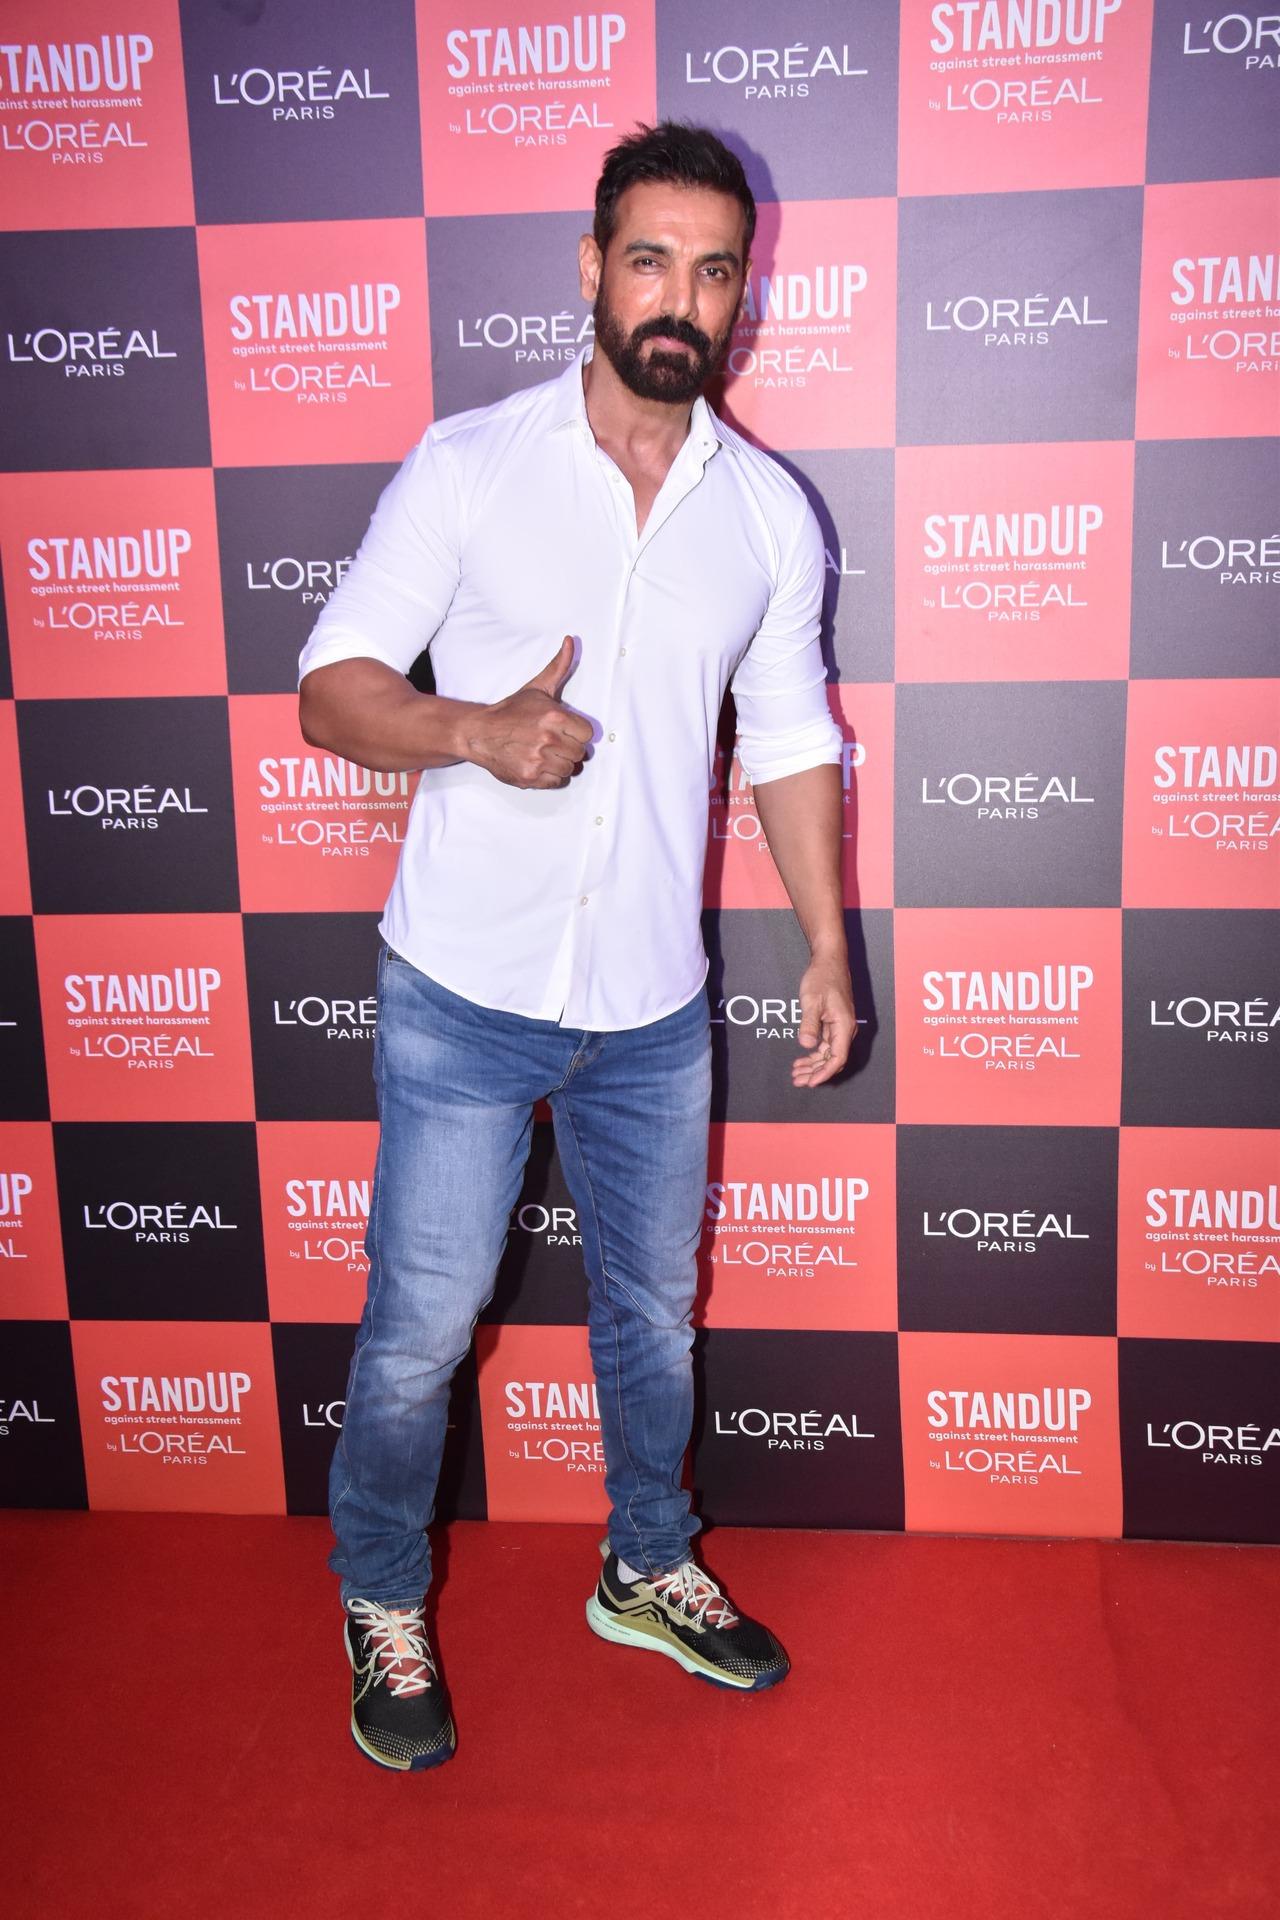 John Abraham kept it simple in a white shirt and blue denims as he posed for the paparazzi with his trademark thumbs up mark